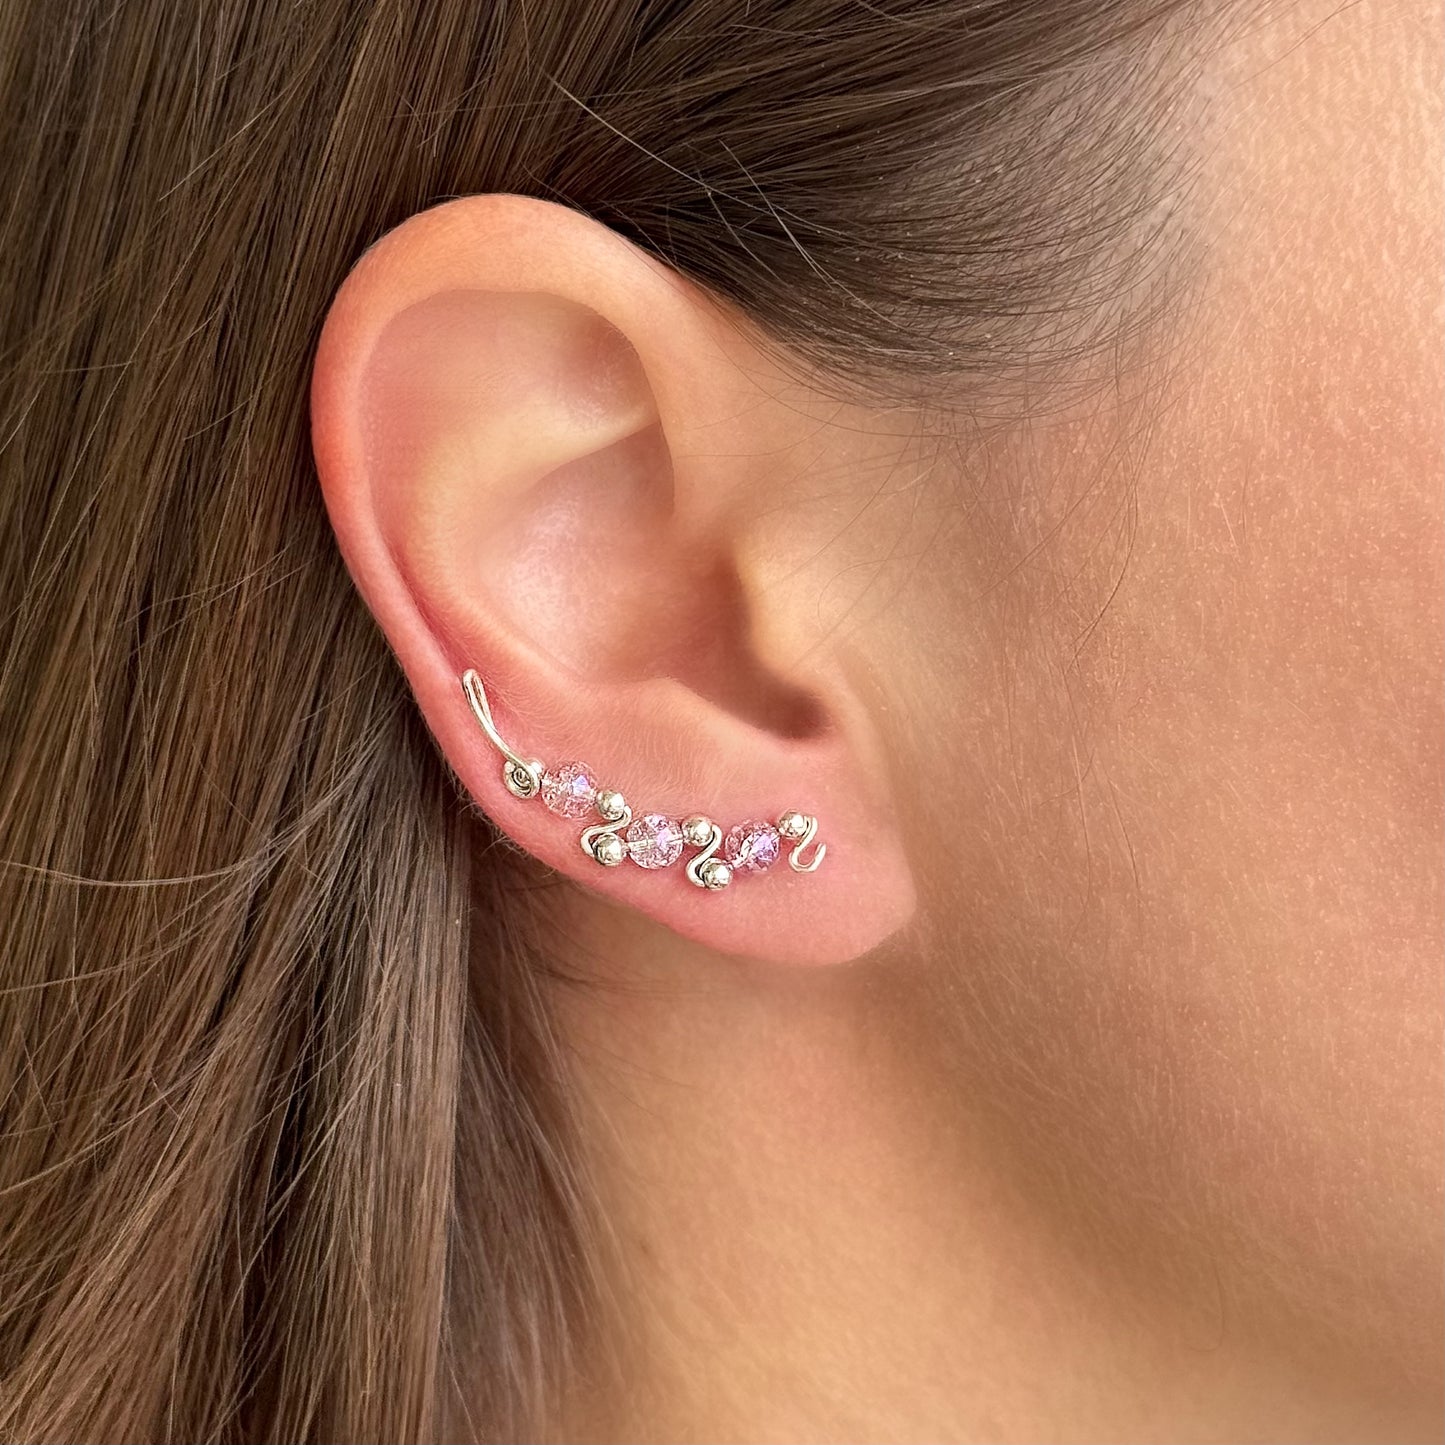 Crystal ear climbers - Sterling Silver 925